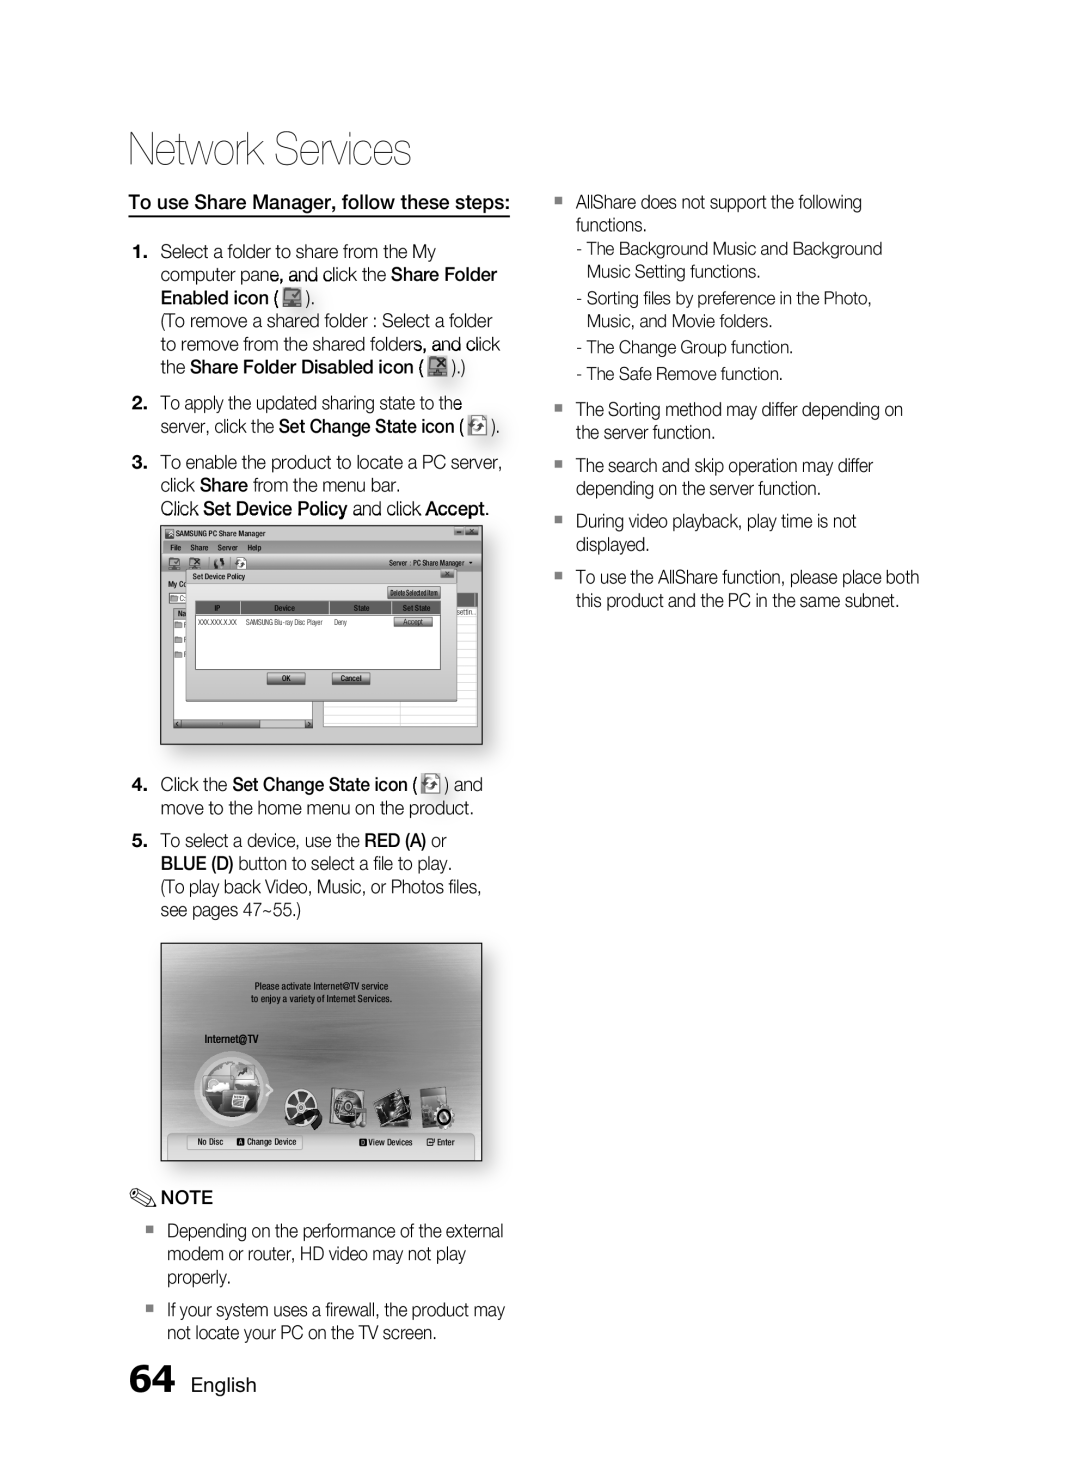 Samsung C6600 user manual English, Network Services 